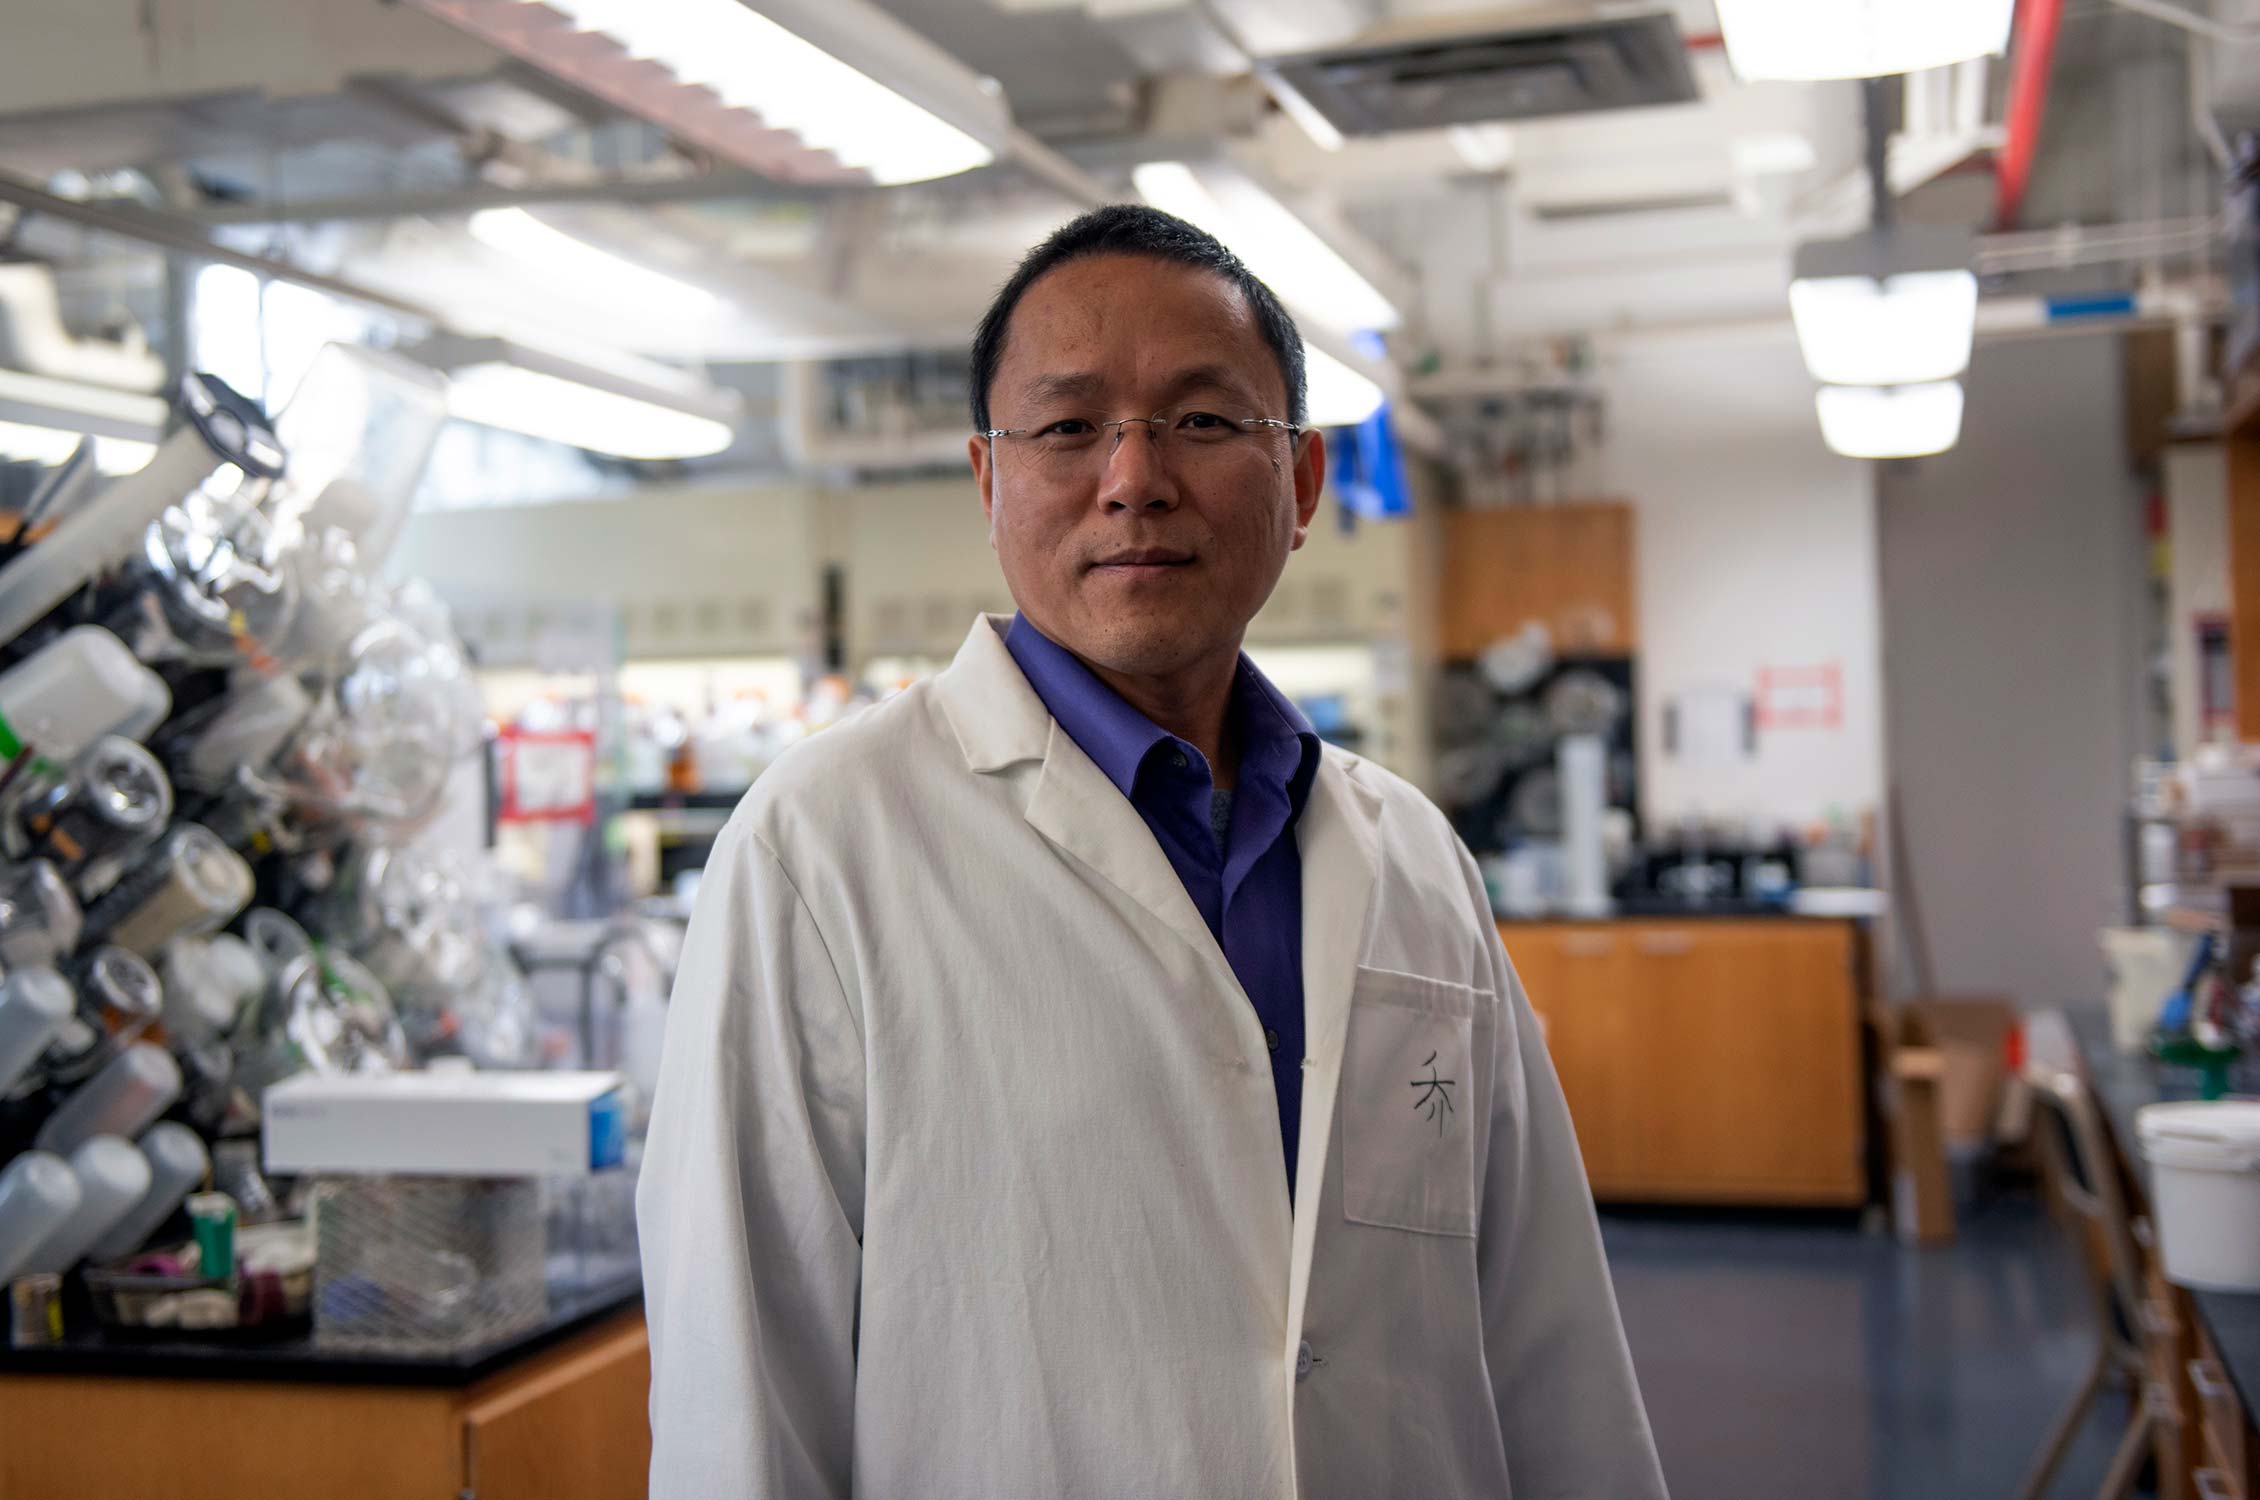 Texas A&M chemist Wenshe Ray Liu smiles at the camera in his lab